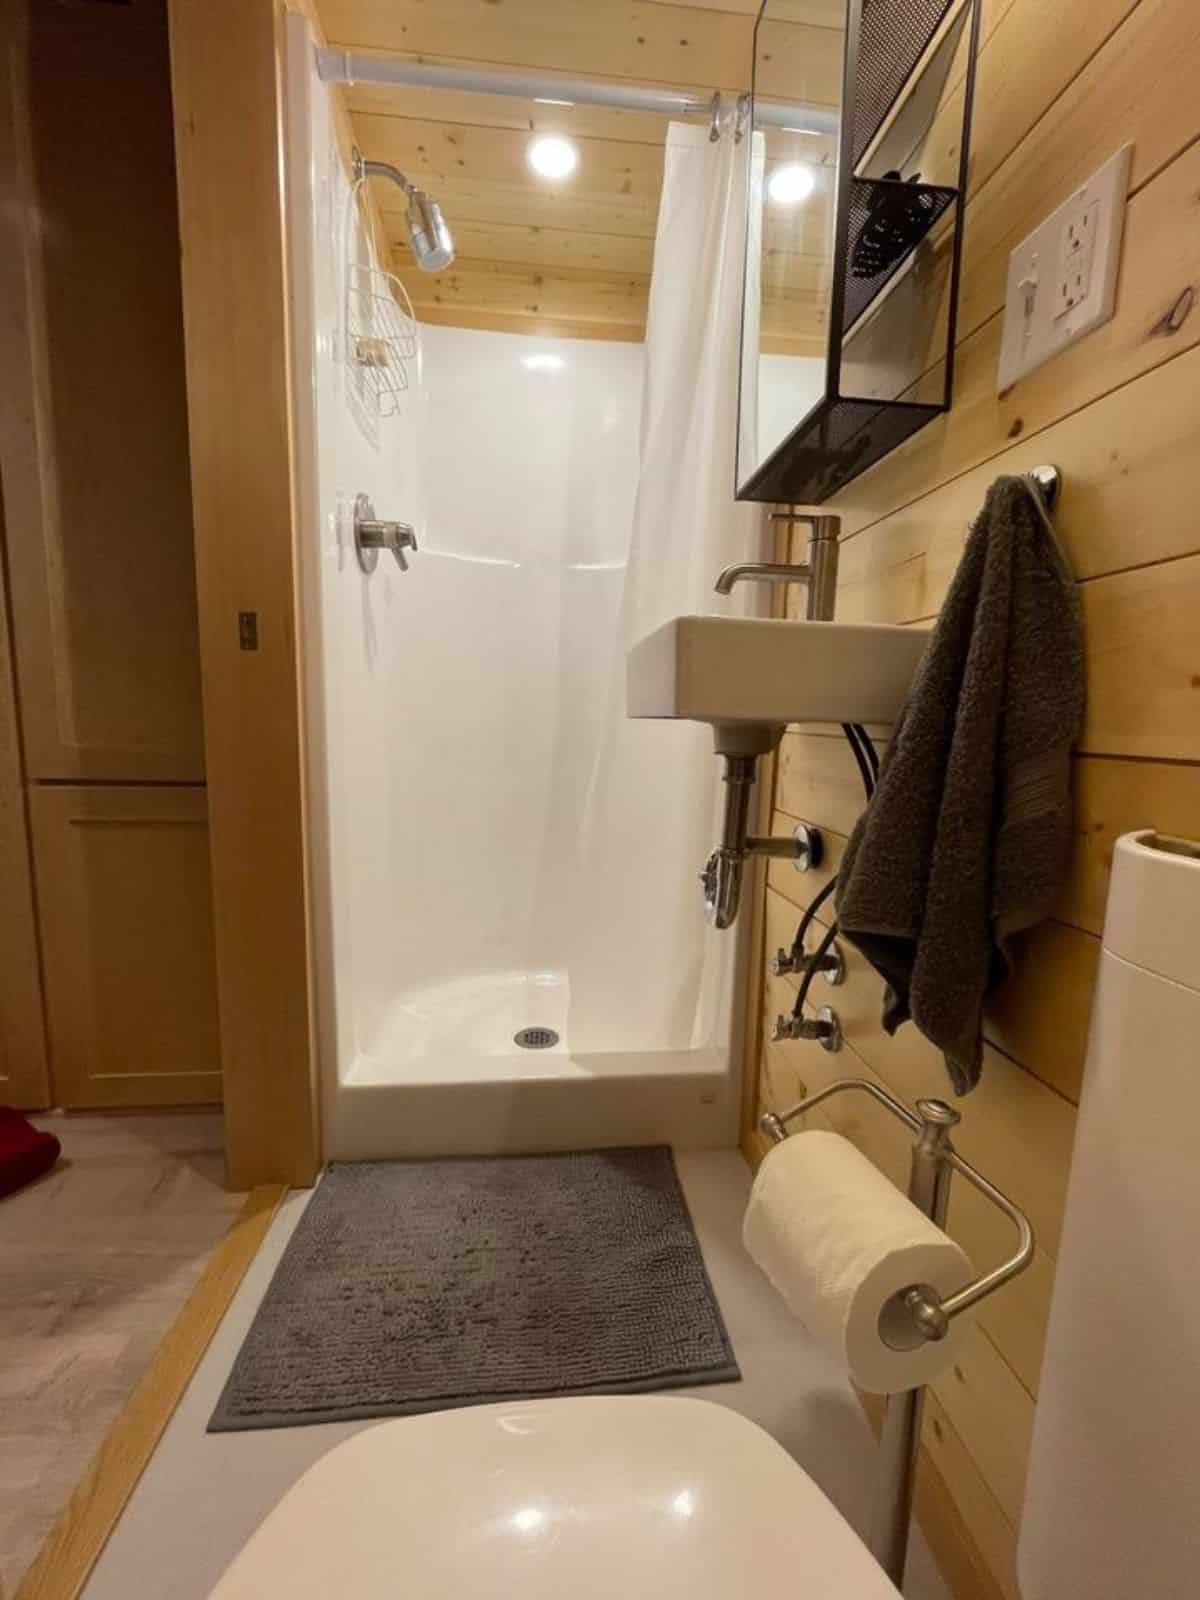 Separate shower area plus sink  with mirror in bathroom